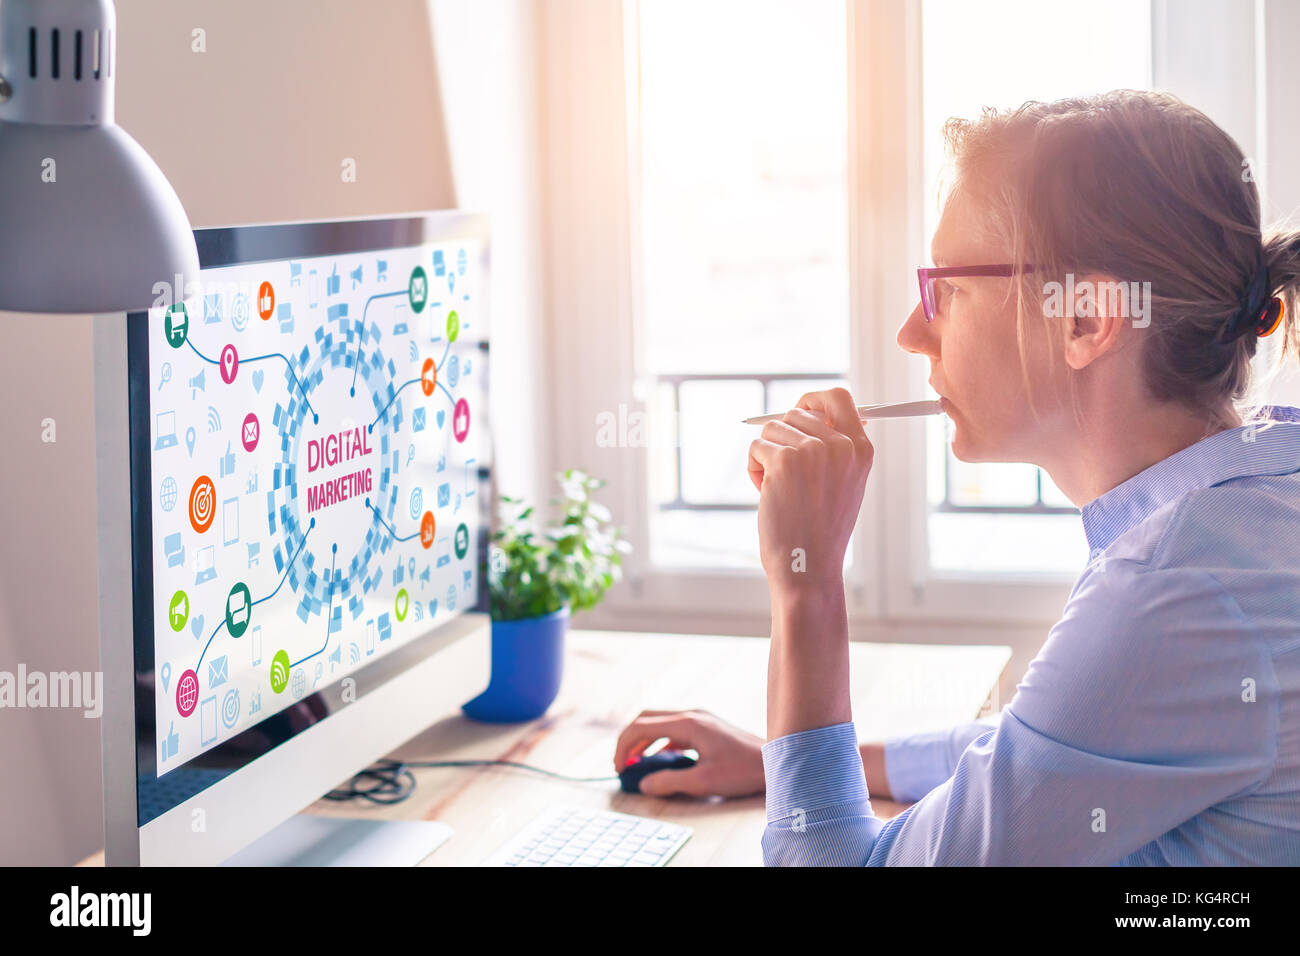 Woman using computer with digital marketing technology concept on the screen with icons about email and social media network advertising and analytics Stock Photo